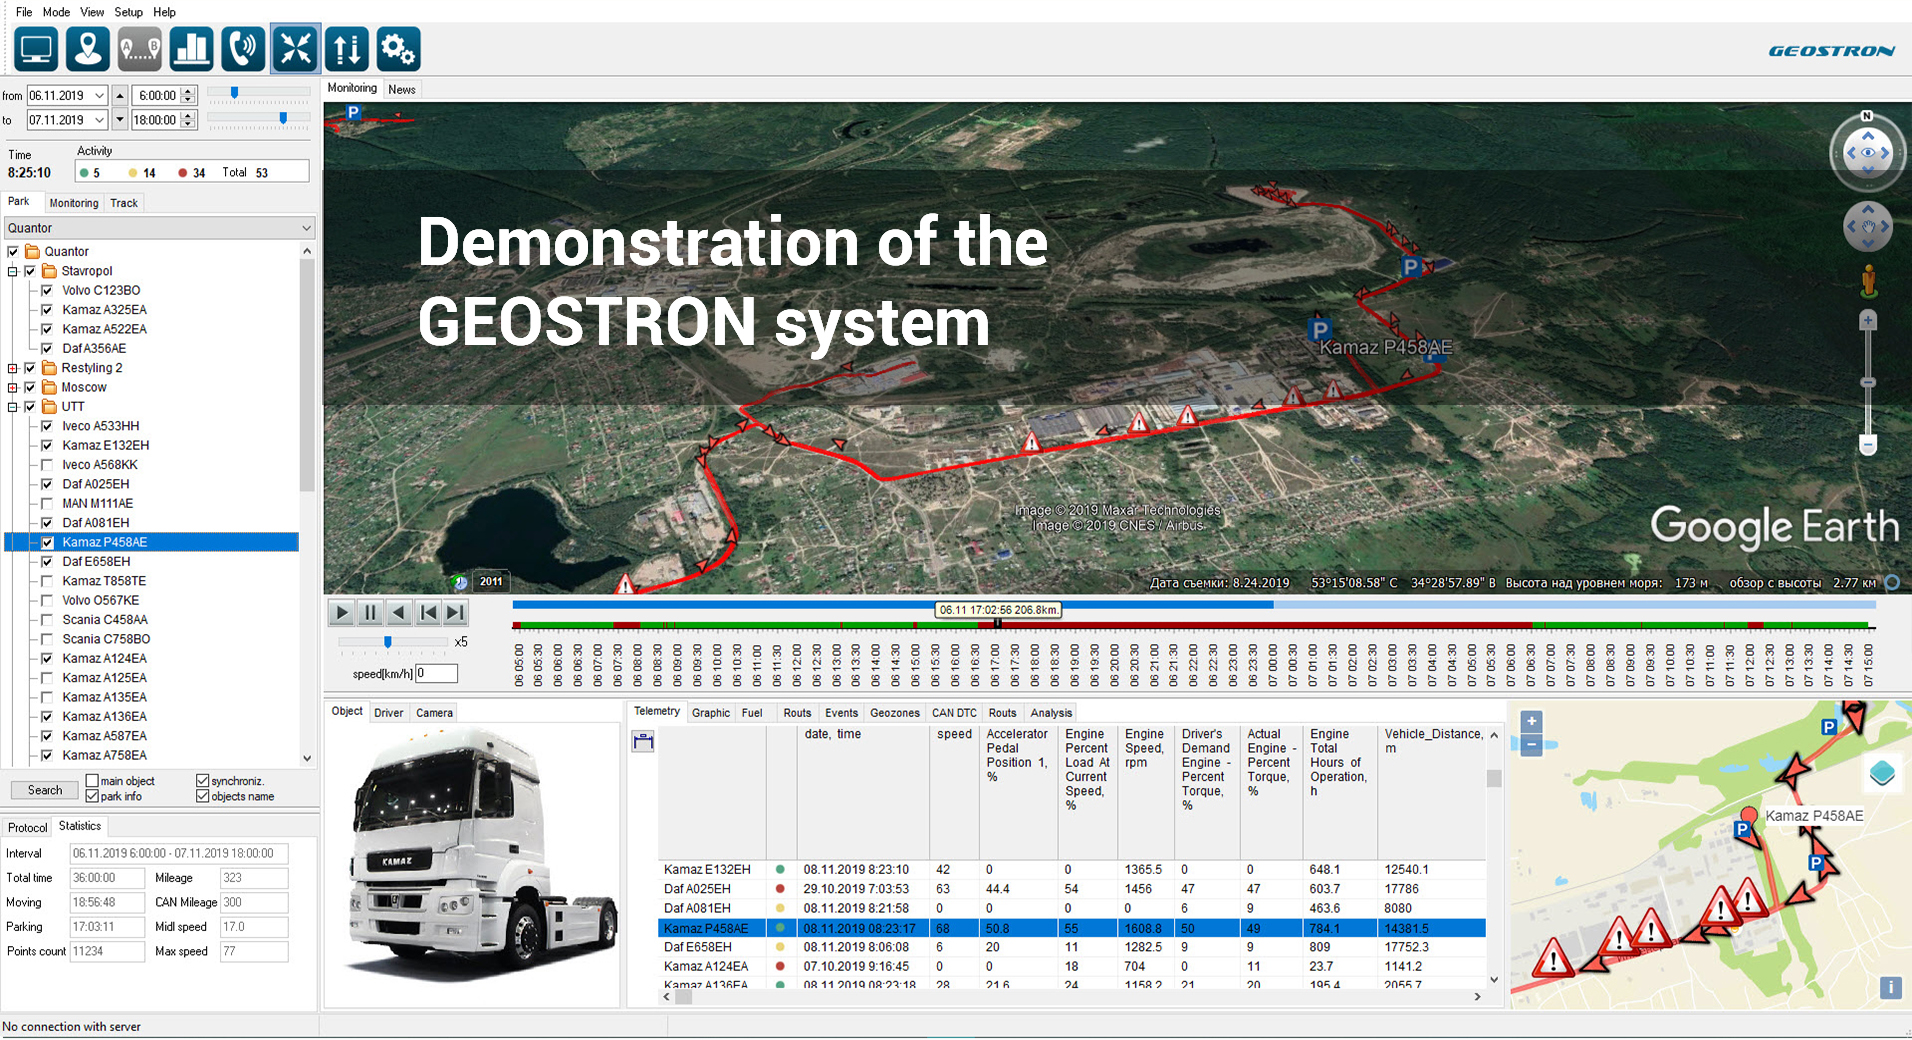 Demonstration of the GEOSTRON system